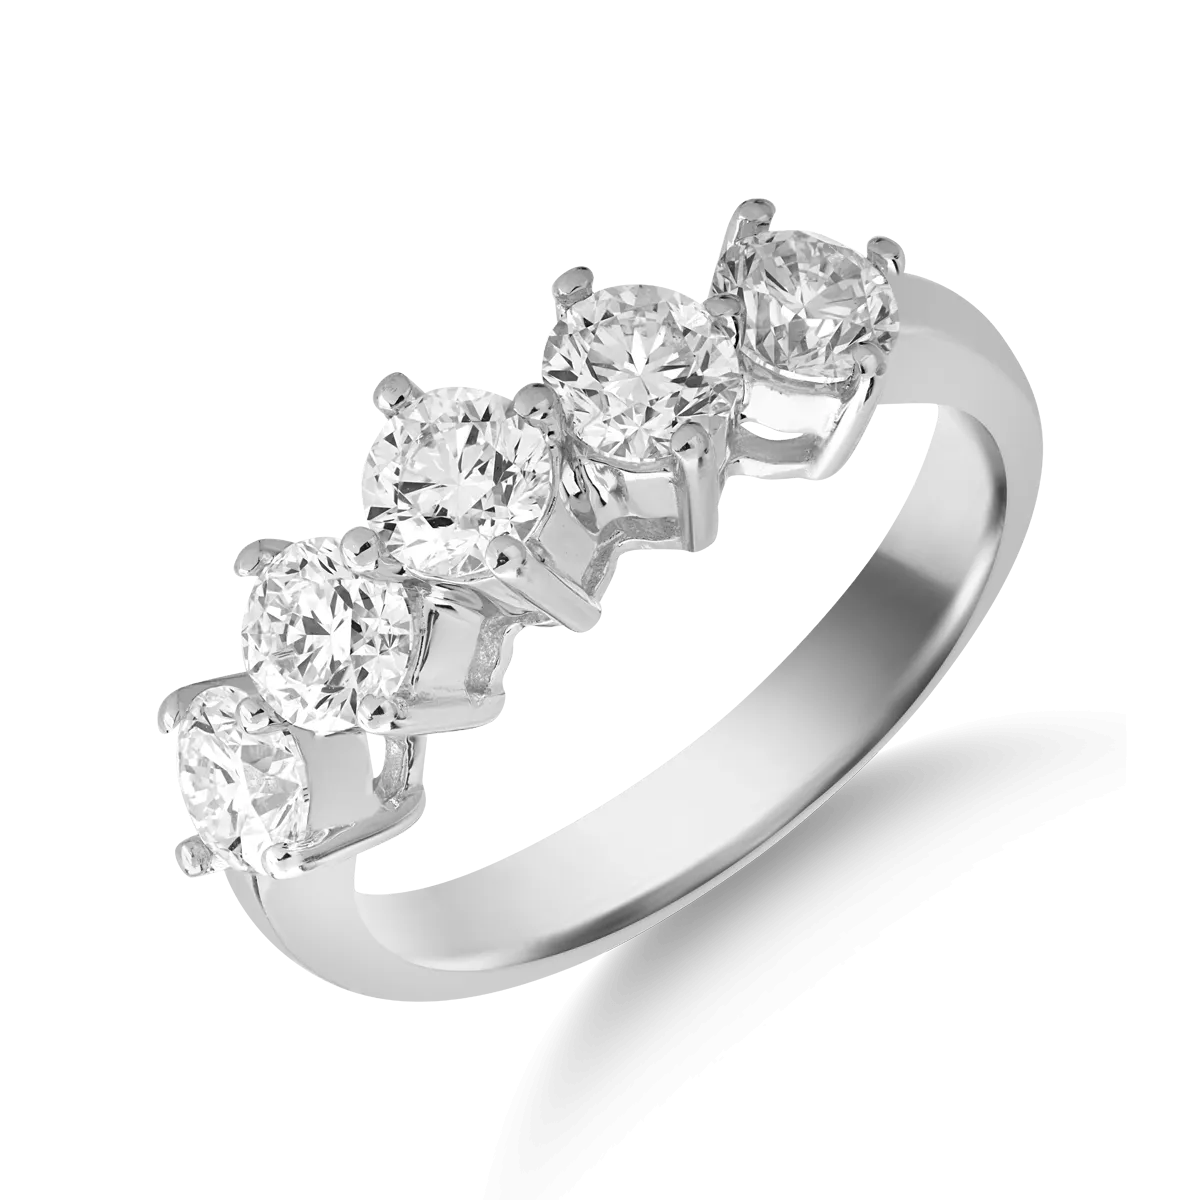 18K white gold ring with 1.4ct diamonds